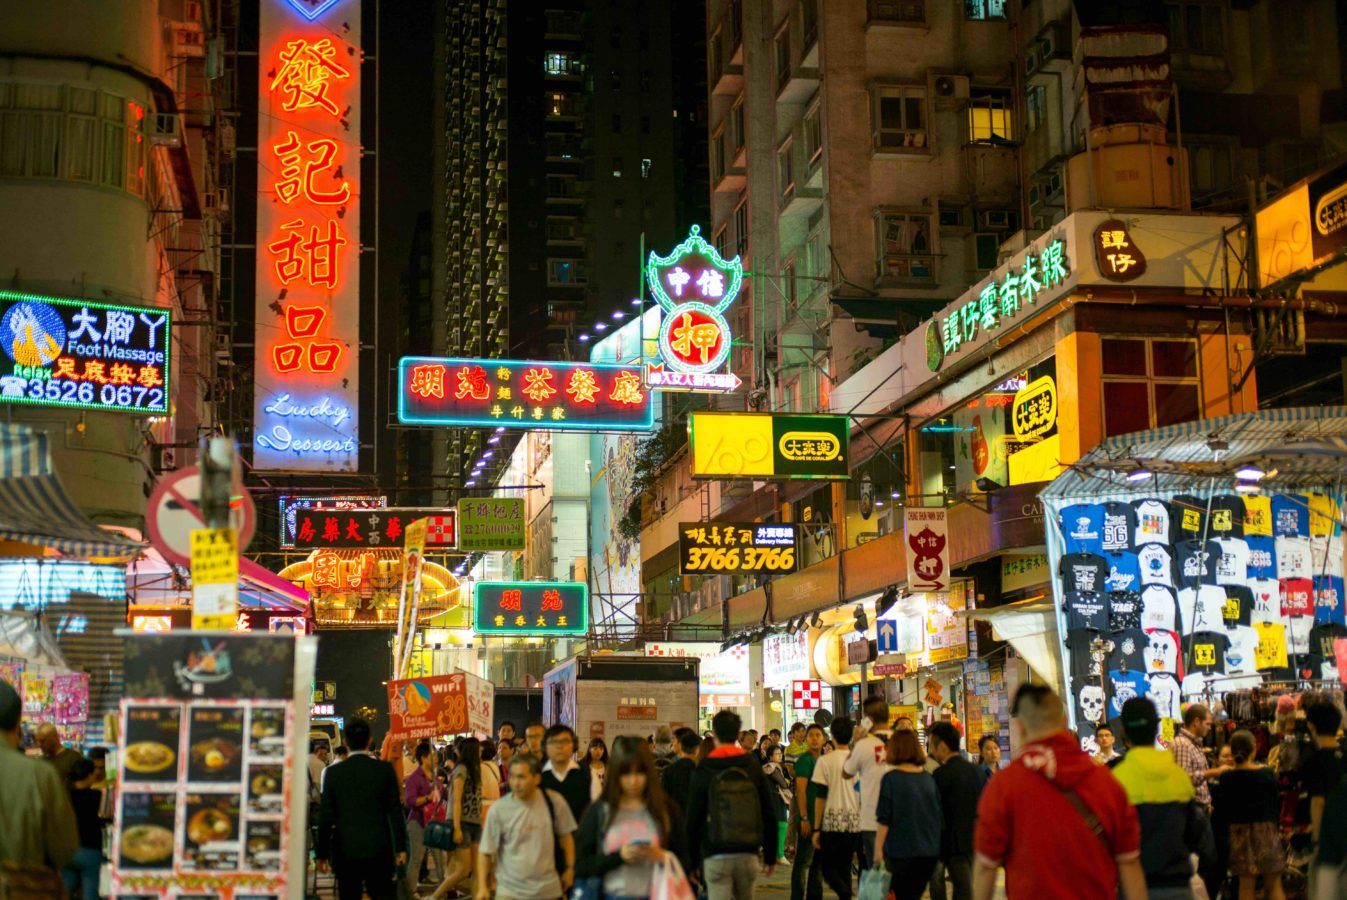 What to eat when you’re in Mong Kok